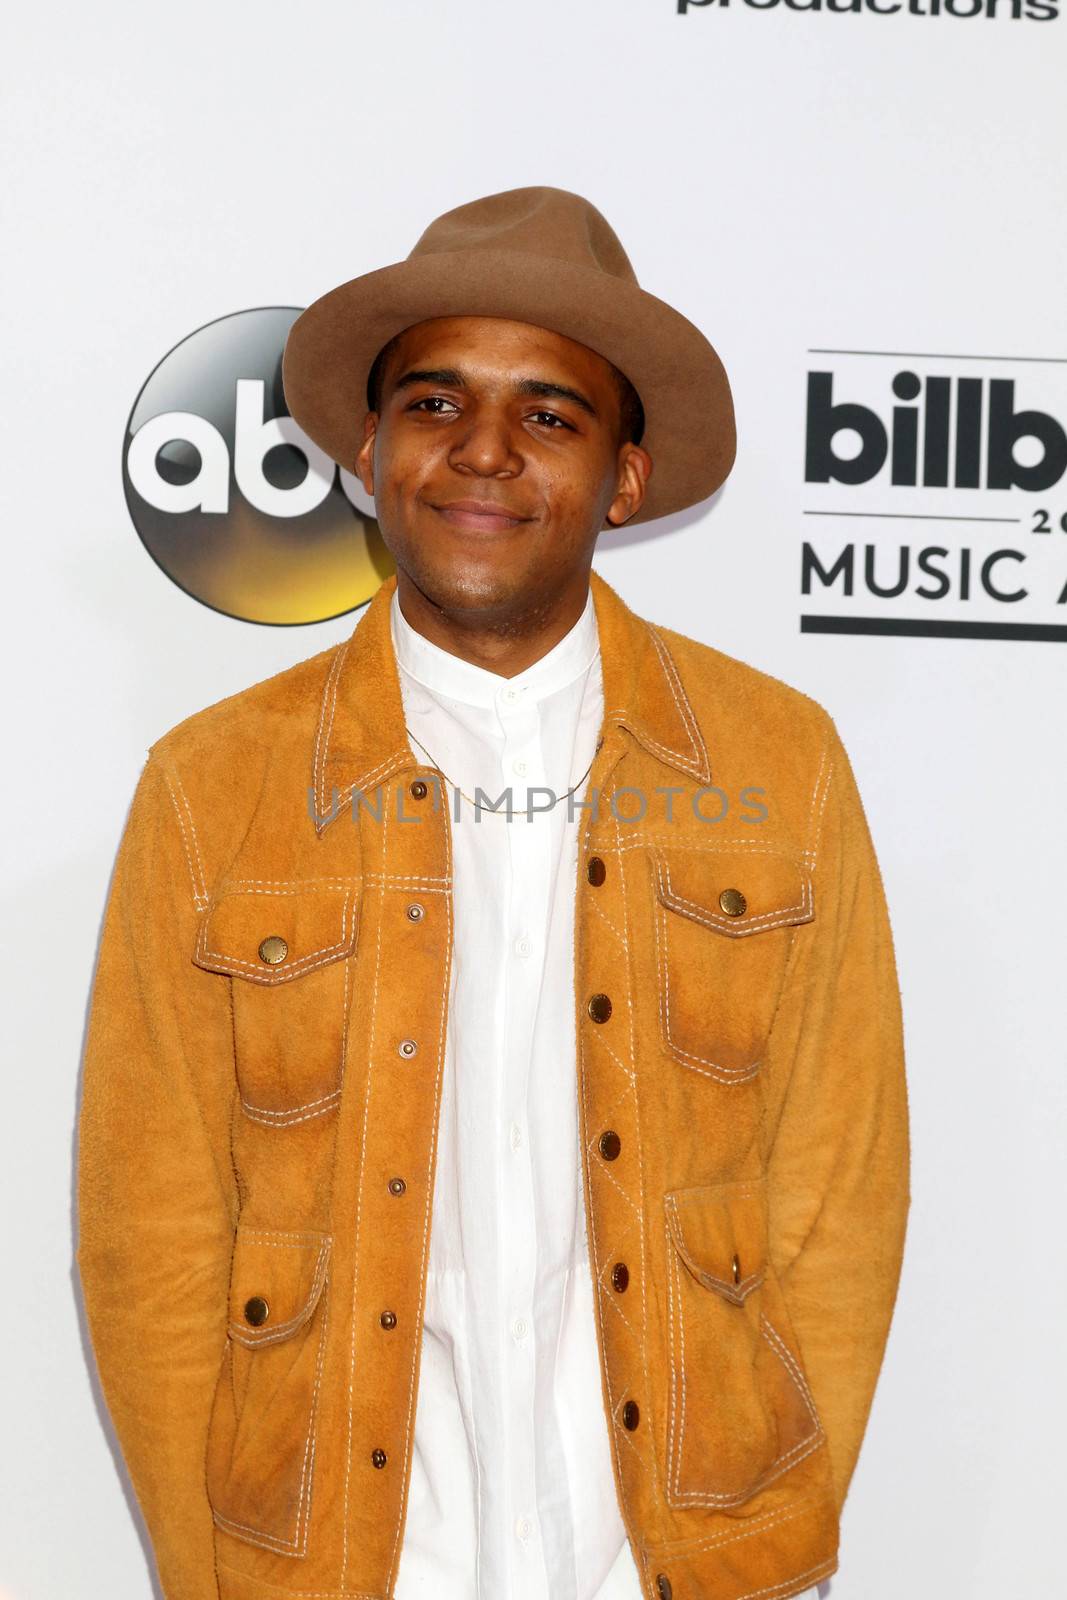 Christopher Jordan Wallace
at the 2017 Billboard Awards Press Room, T-Mobile Arena, Las Vegas, NV 05-21-17/ImageCollect by ImageCollect